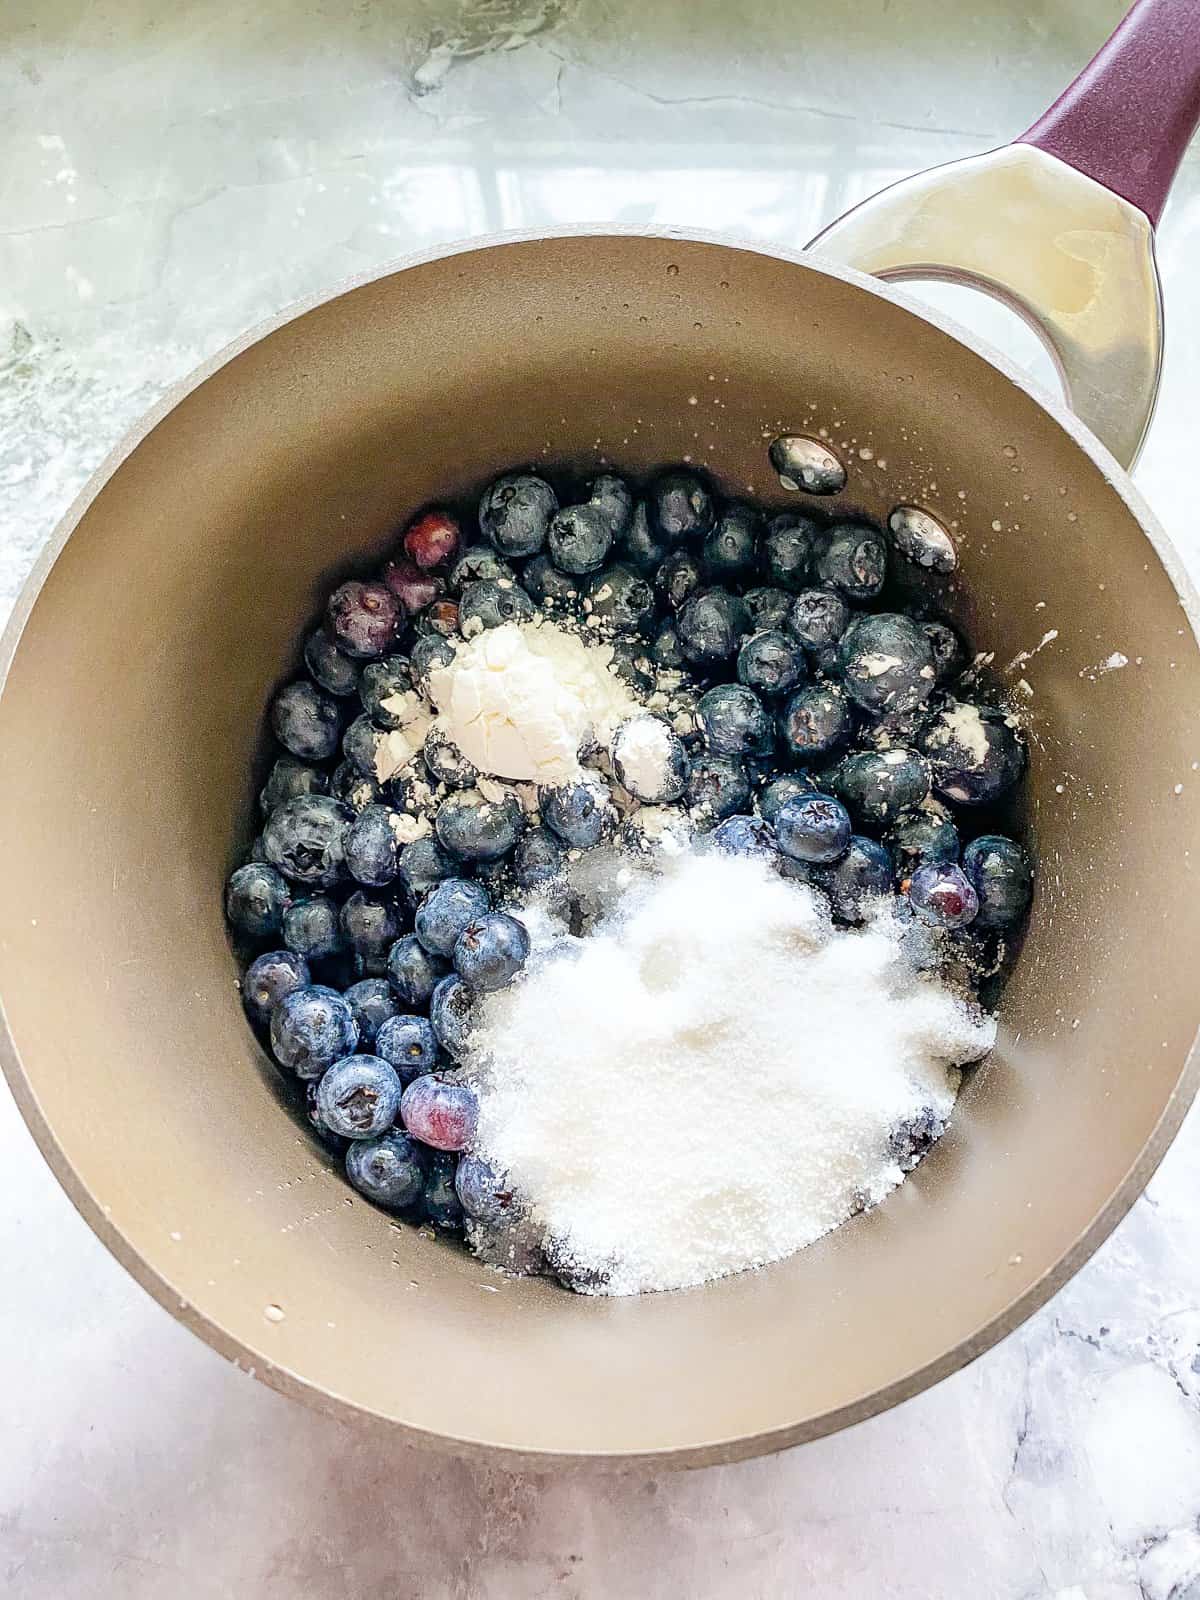 white counter with a pot with a pink handle filled with blue blueberries with white sugar on top.